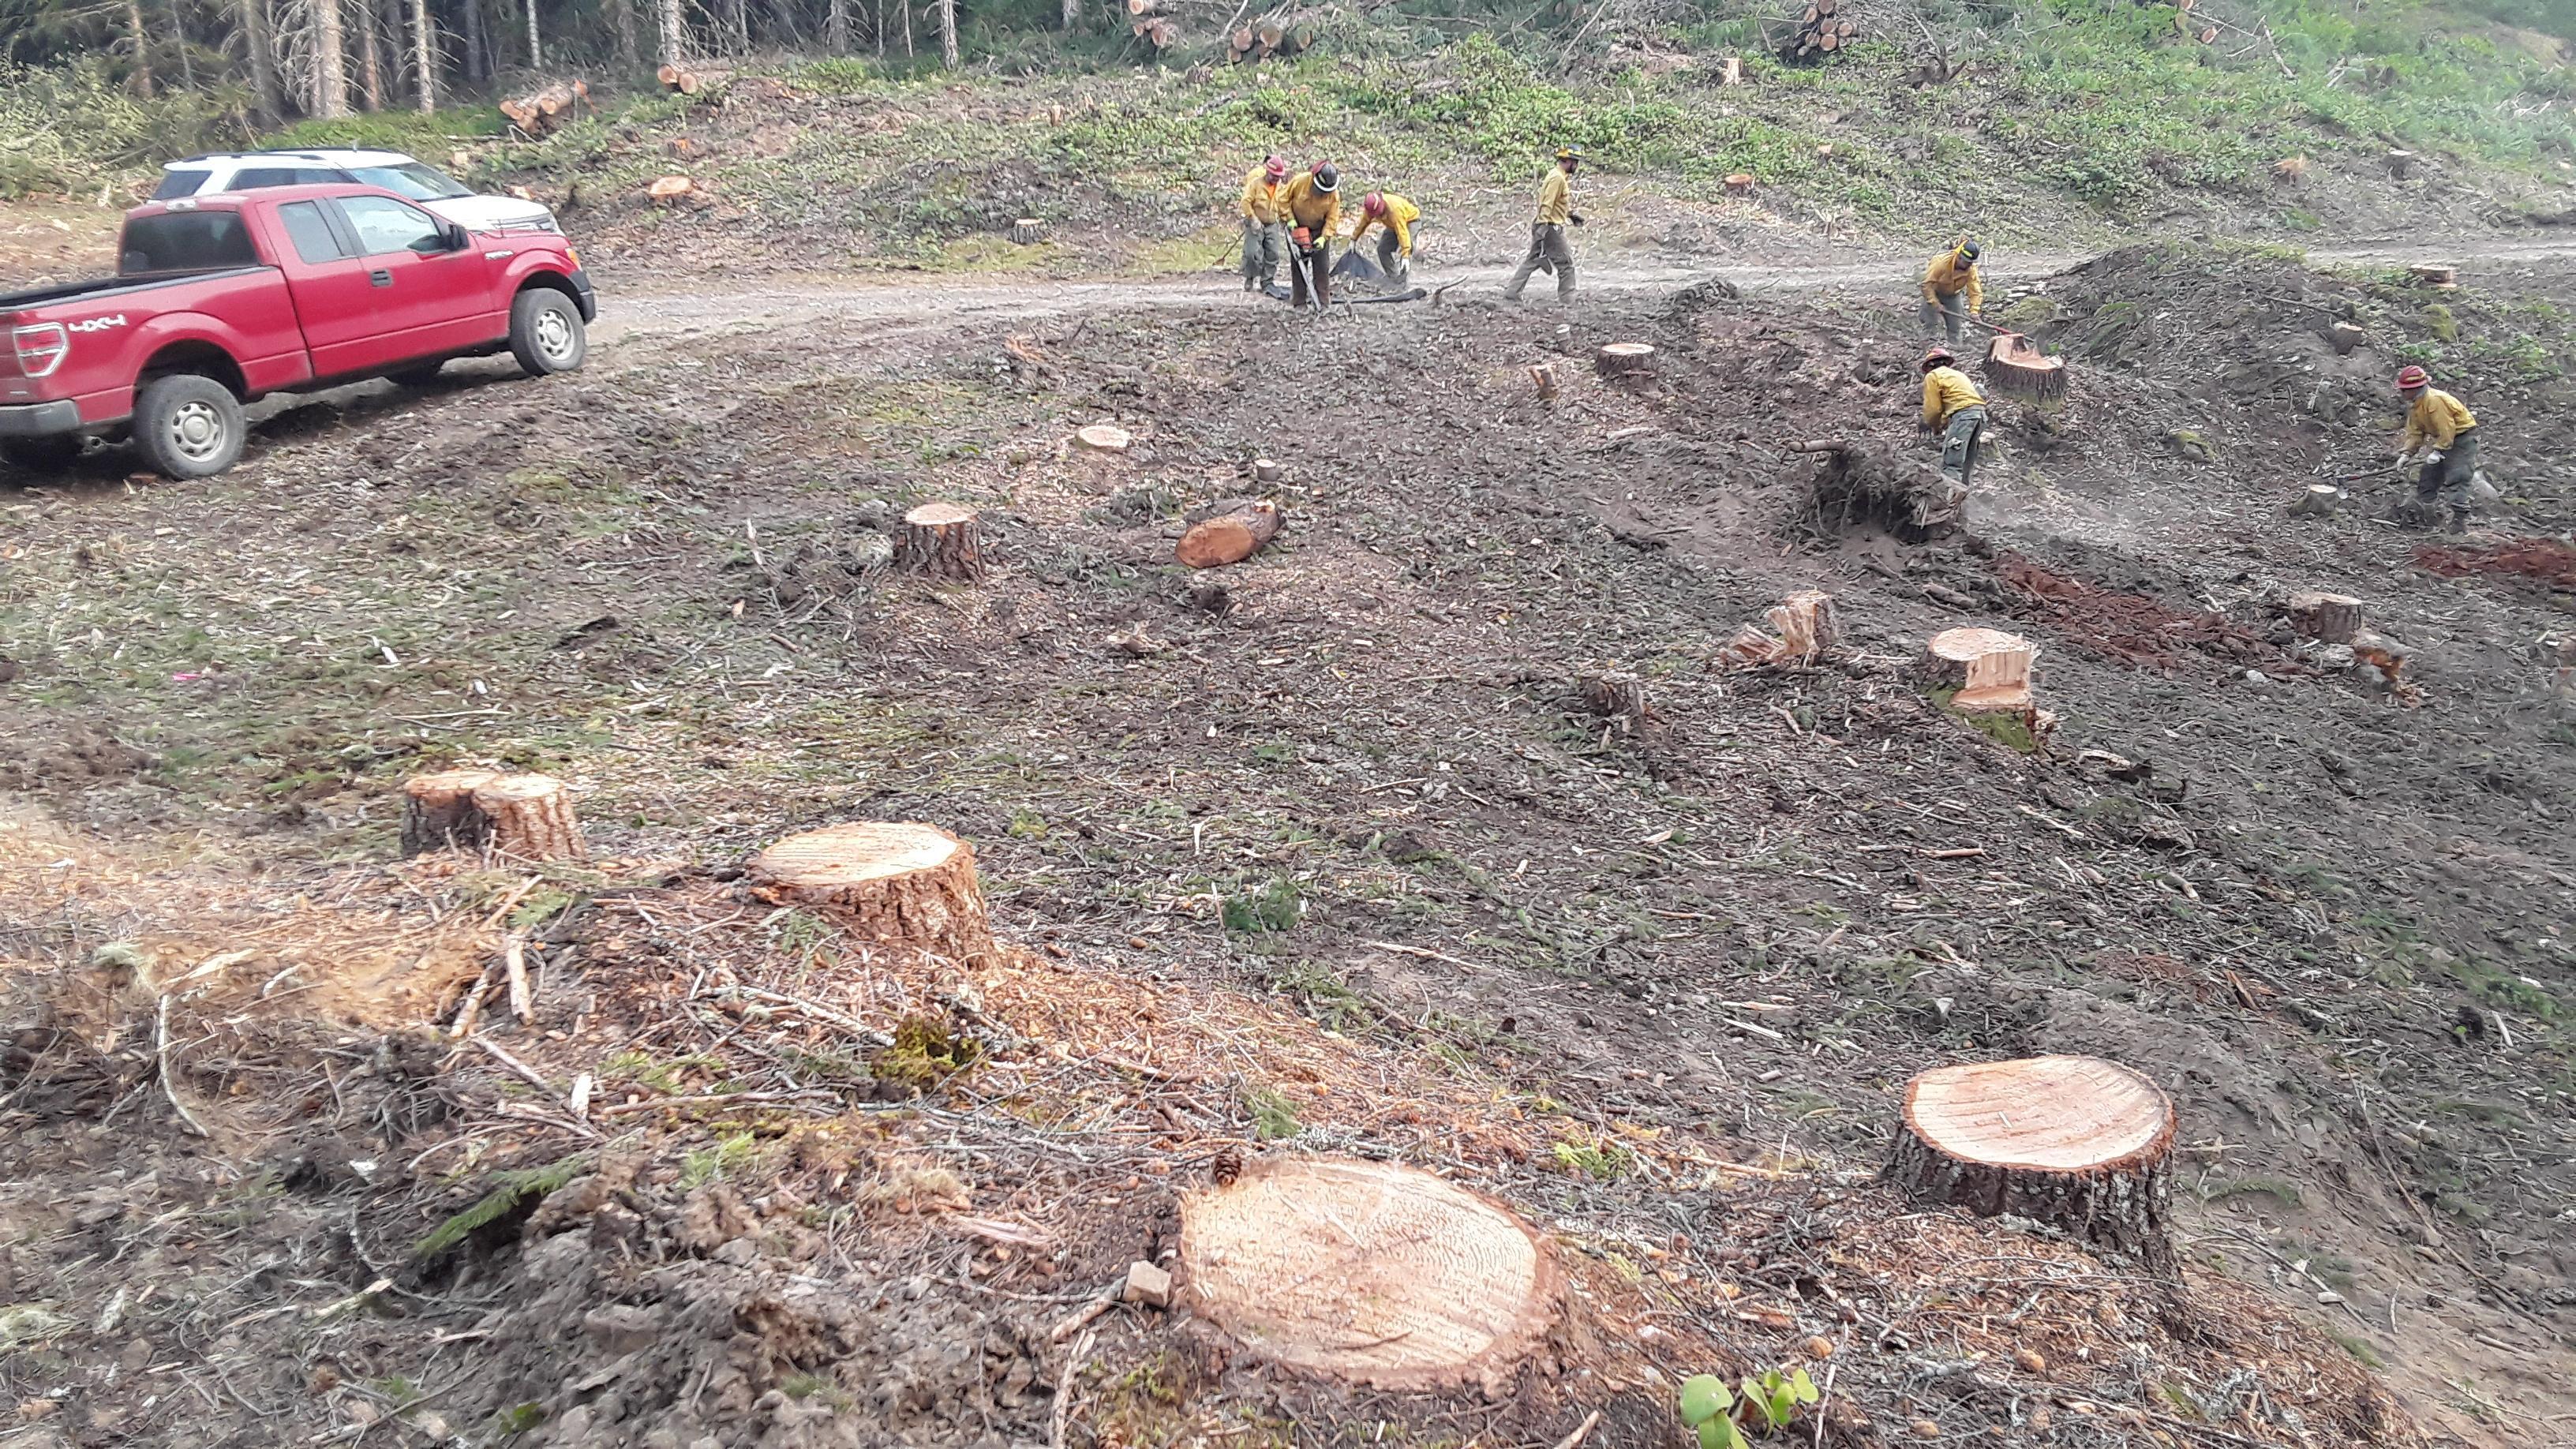 Firefighters clear an area for a helicopter landing area. The landing will be use in case of emergencies and assistance from a helicopter is needed.